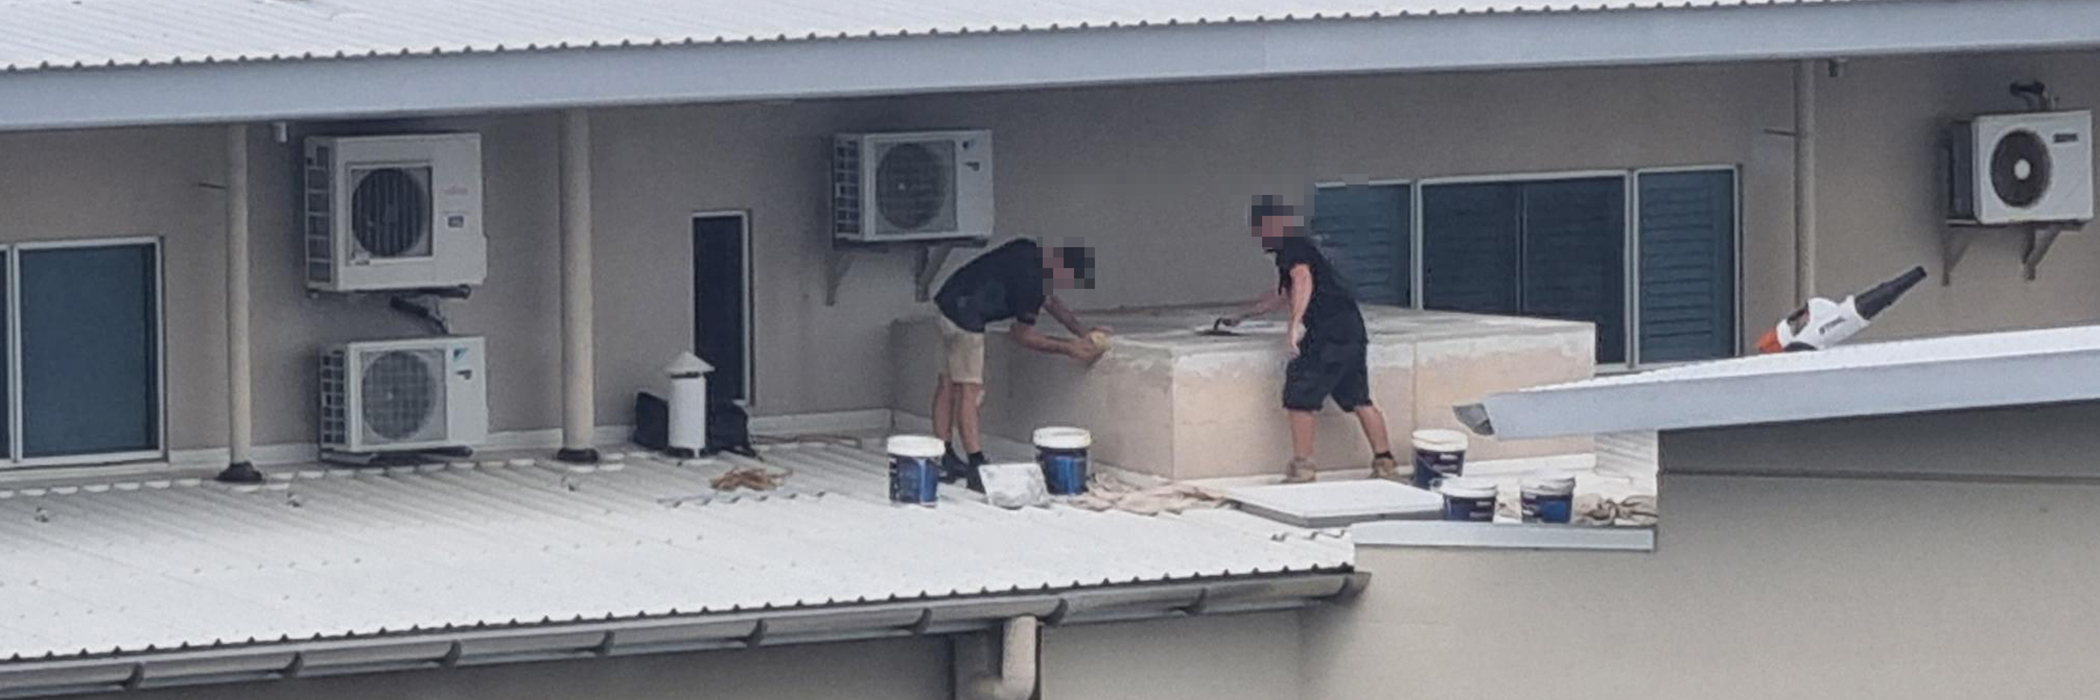 The image shows a supervisor and worker on a ten storey roof with no fall protection.